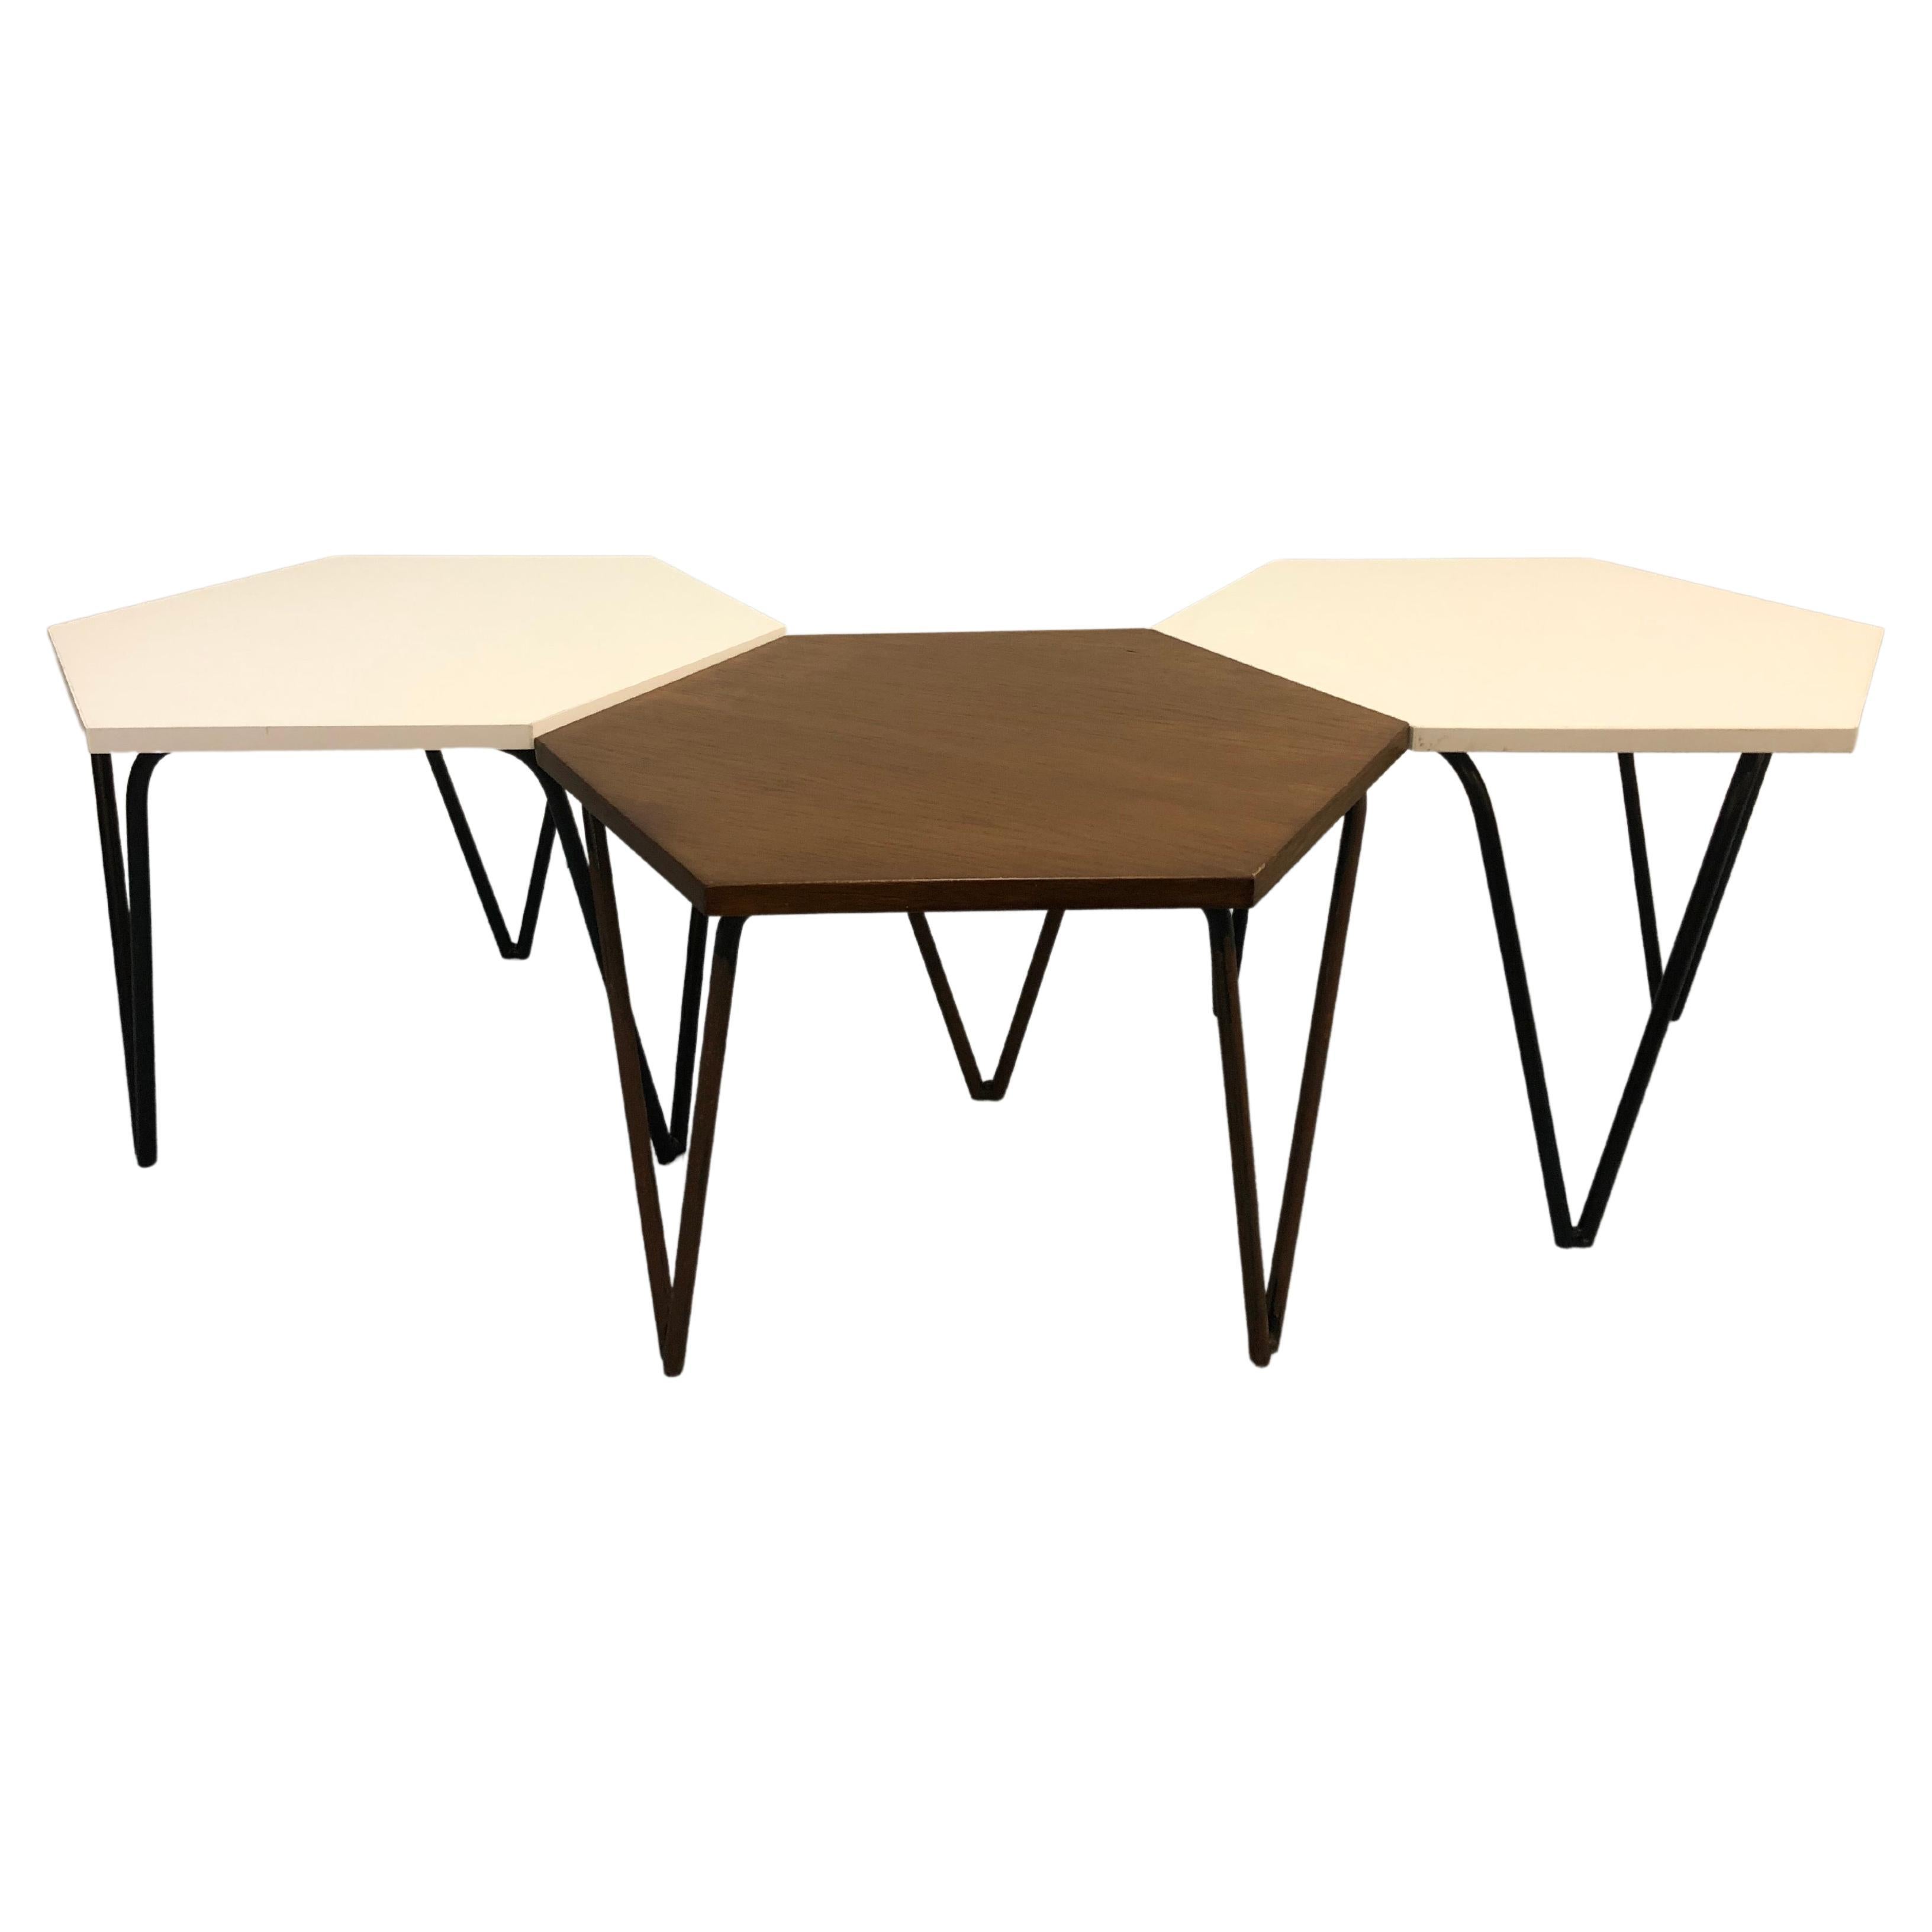 Set of Three Low Hexagonal Coffee Tables by Giò Ponti for Isa Bergamo, Italy 50s